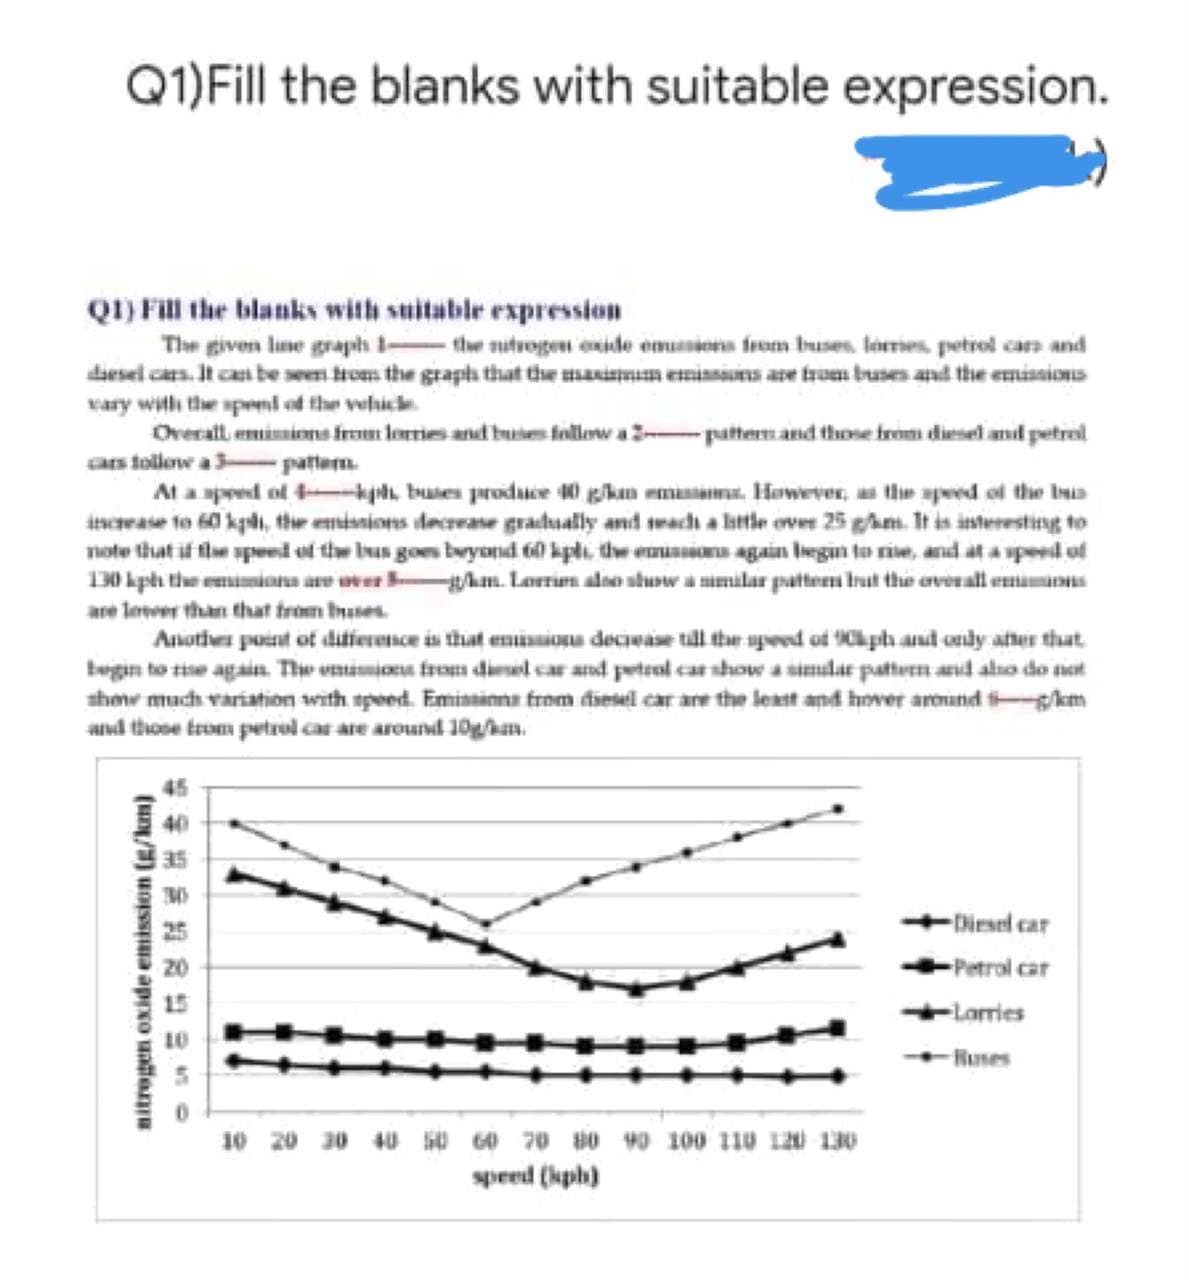 Q1)Fill the blanks with suitable expression.
QI) Fill the blanks with suitable expression
The given line graph 1 the sutrogen exide emuniens from buses. lorries, petrol can and
daesel cars. It casn be swen trom the graph that the manimm eminsuns are trom buses and the emissions
wary with the spend of the vehicle
Overall emisnions from lorries and buses follew a 2-patterm and those from diesel ant petrel
cas tollow a pattem.
AMa spred of 4kgah, buses produce 0 gkan emaama. However, as the speed ofl the bas
iterase to 60 kgai, the emisnions decrease gradsally and seadi a little over 25 ghm. It is isteresting to
note that if fle speed of the bus goes bryond 60 kpli, te euasiona again Iegin to rie, and at a upeed of
130 kph the emimioana are ver km. Larrien also shusw a nimilar pattem lut the averall emamans
are lower than that trom buses.
Anotives point of datferetnoe is that emisnionu deciease till the speed of 9Chph and only ater that
begin to tie again. The vaissionu from dirsel car and peteal car show a simular patten arud also do tet
shmr much variation with speed. Eminninna from diesel car are the least and hover areund -km
ad those trom petrel car are arouid 10g/han.
25
-Diesel car
-Petrol car
-Lorries
-Huses
10 20 30 40 0 60 70 s0 40 100 110 120 130
speed (kph)
nitrogen exide emission (g/km)
